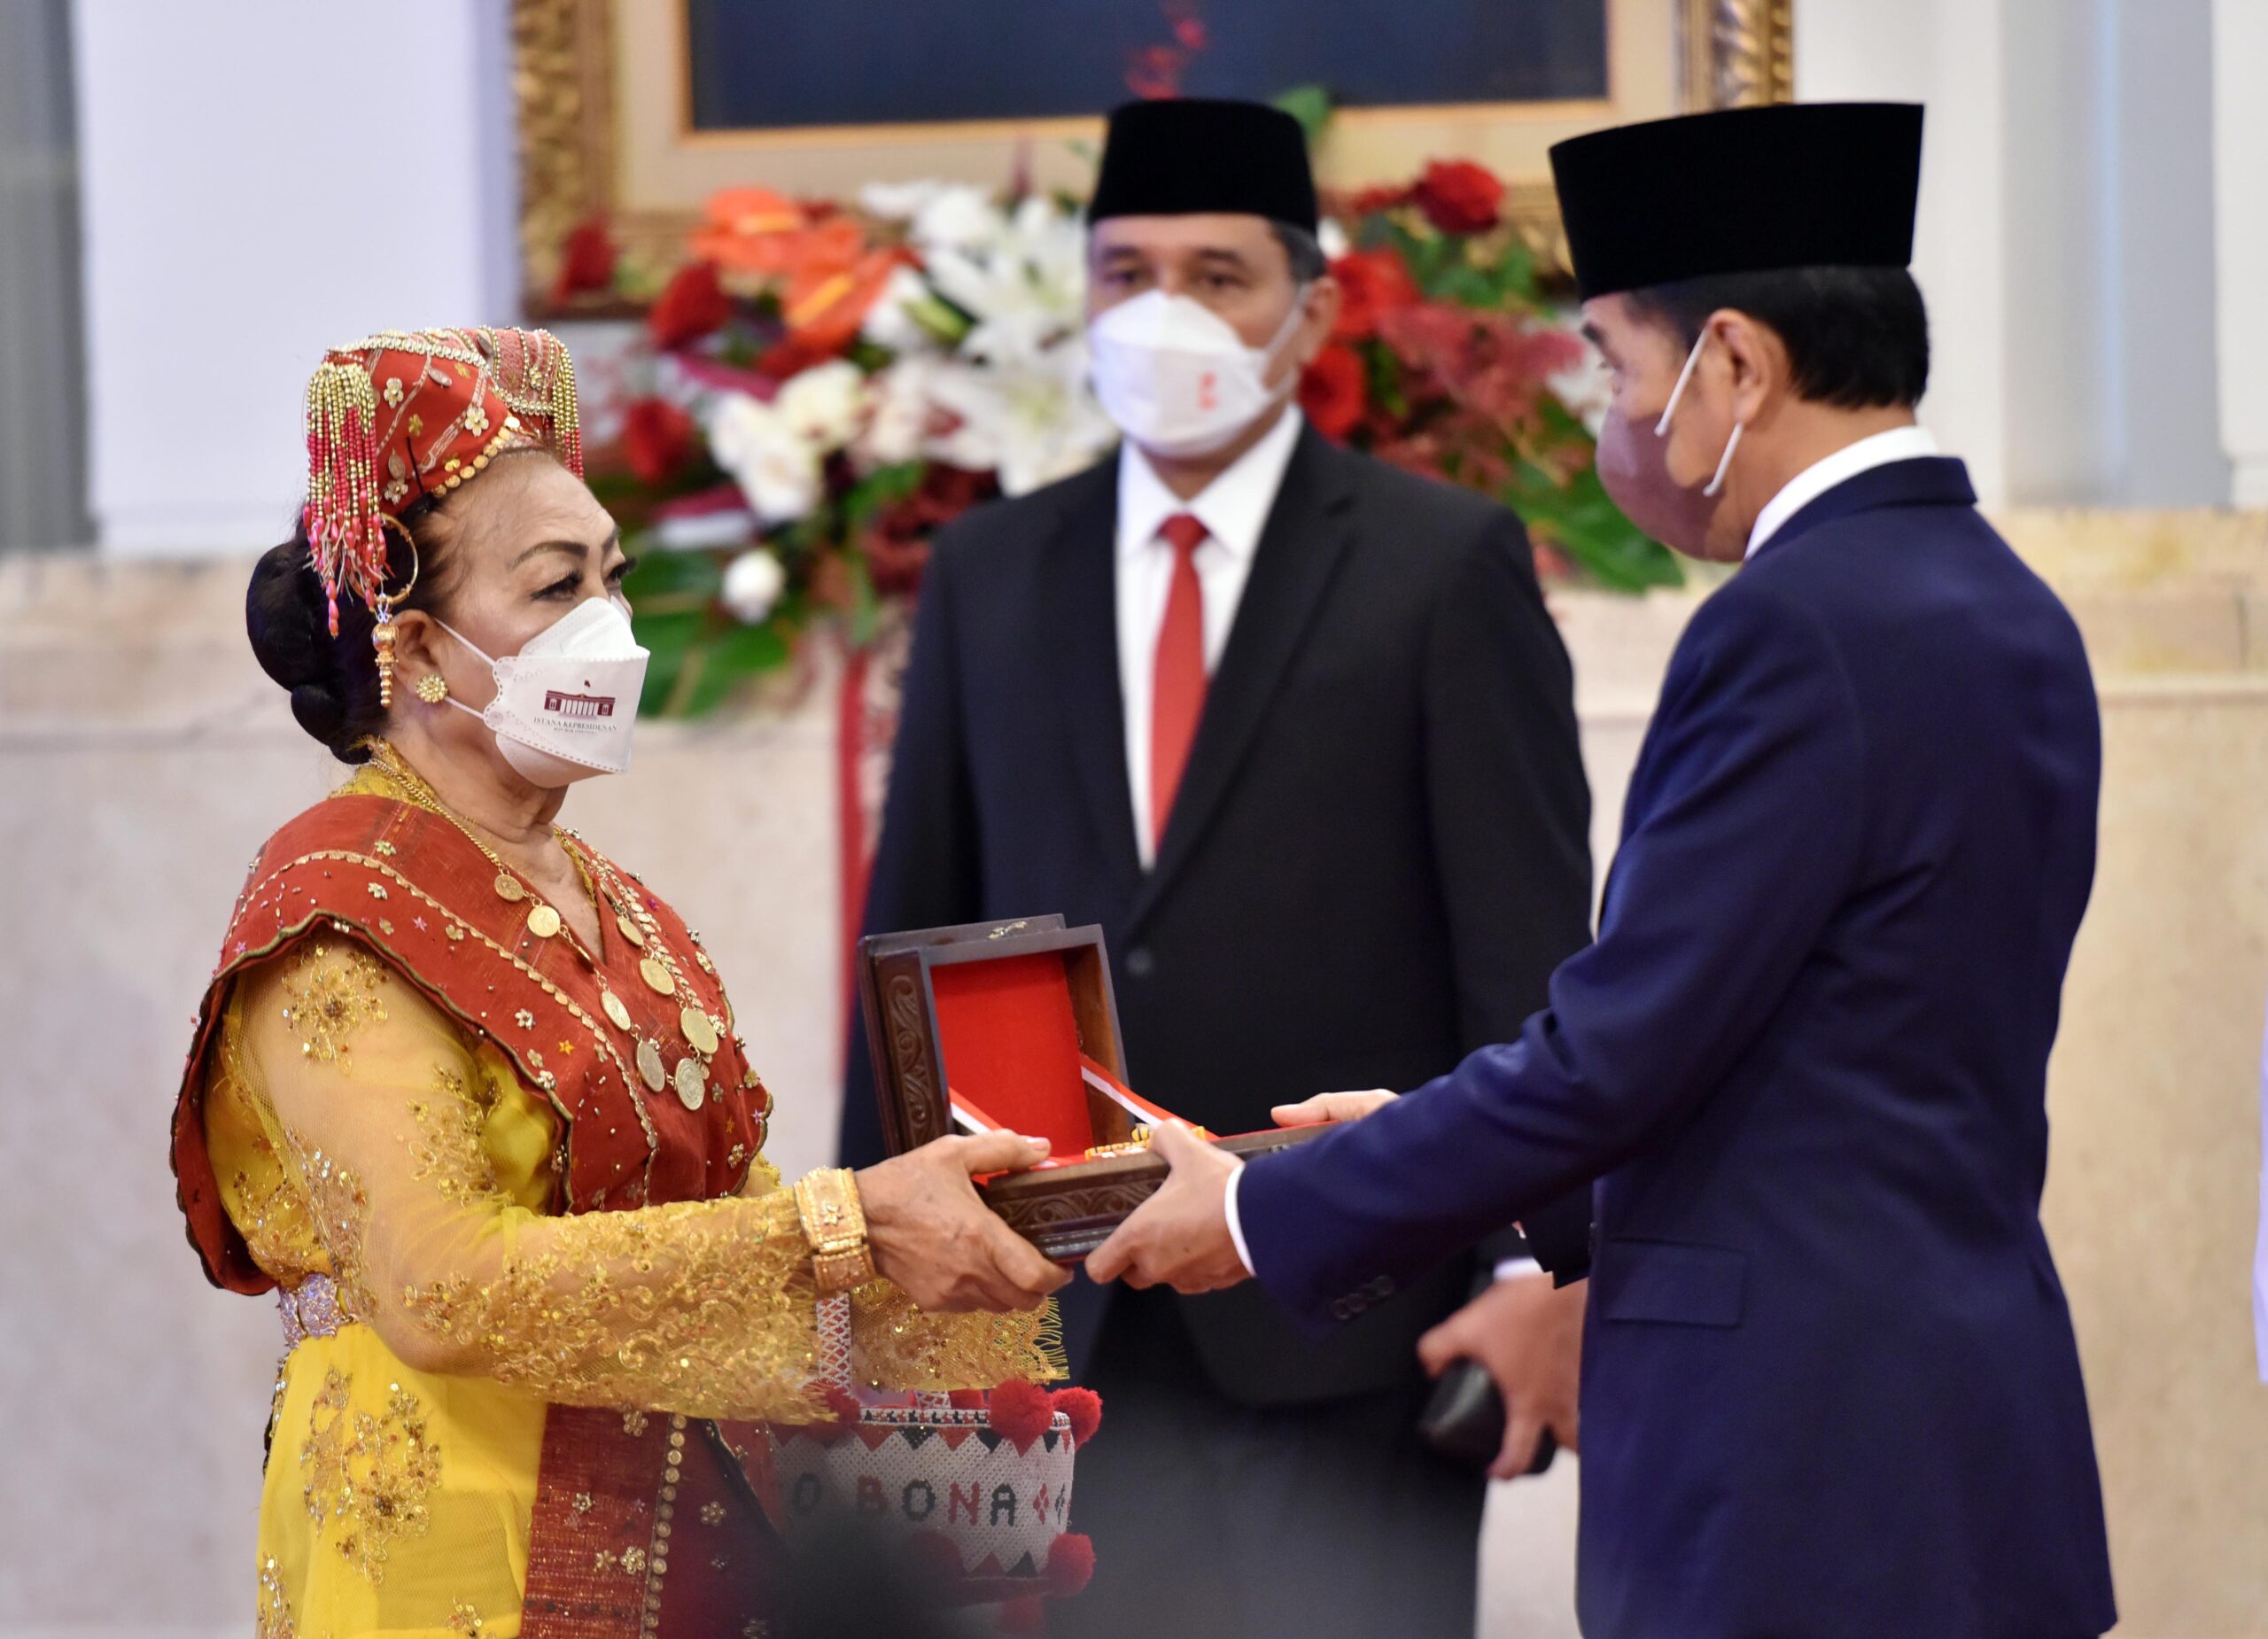 President Jokowi conferring the Republic of Indonesia's Medal of Honor, at the State Palace, Jakarta, Thursday (12/08/2022).